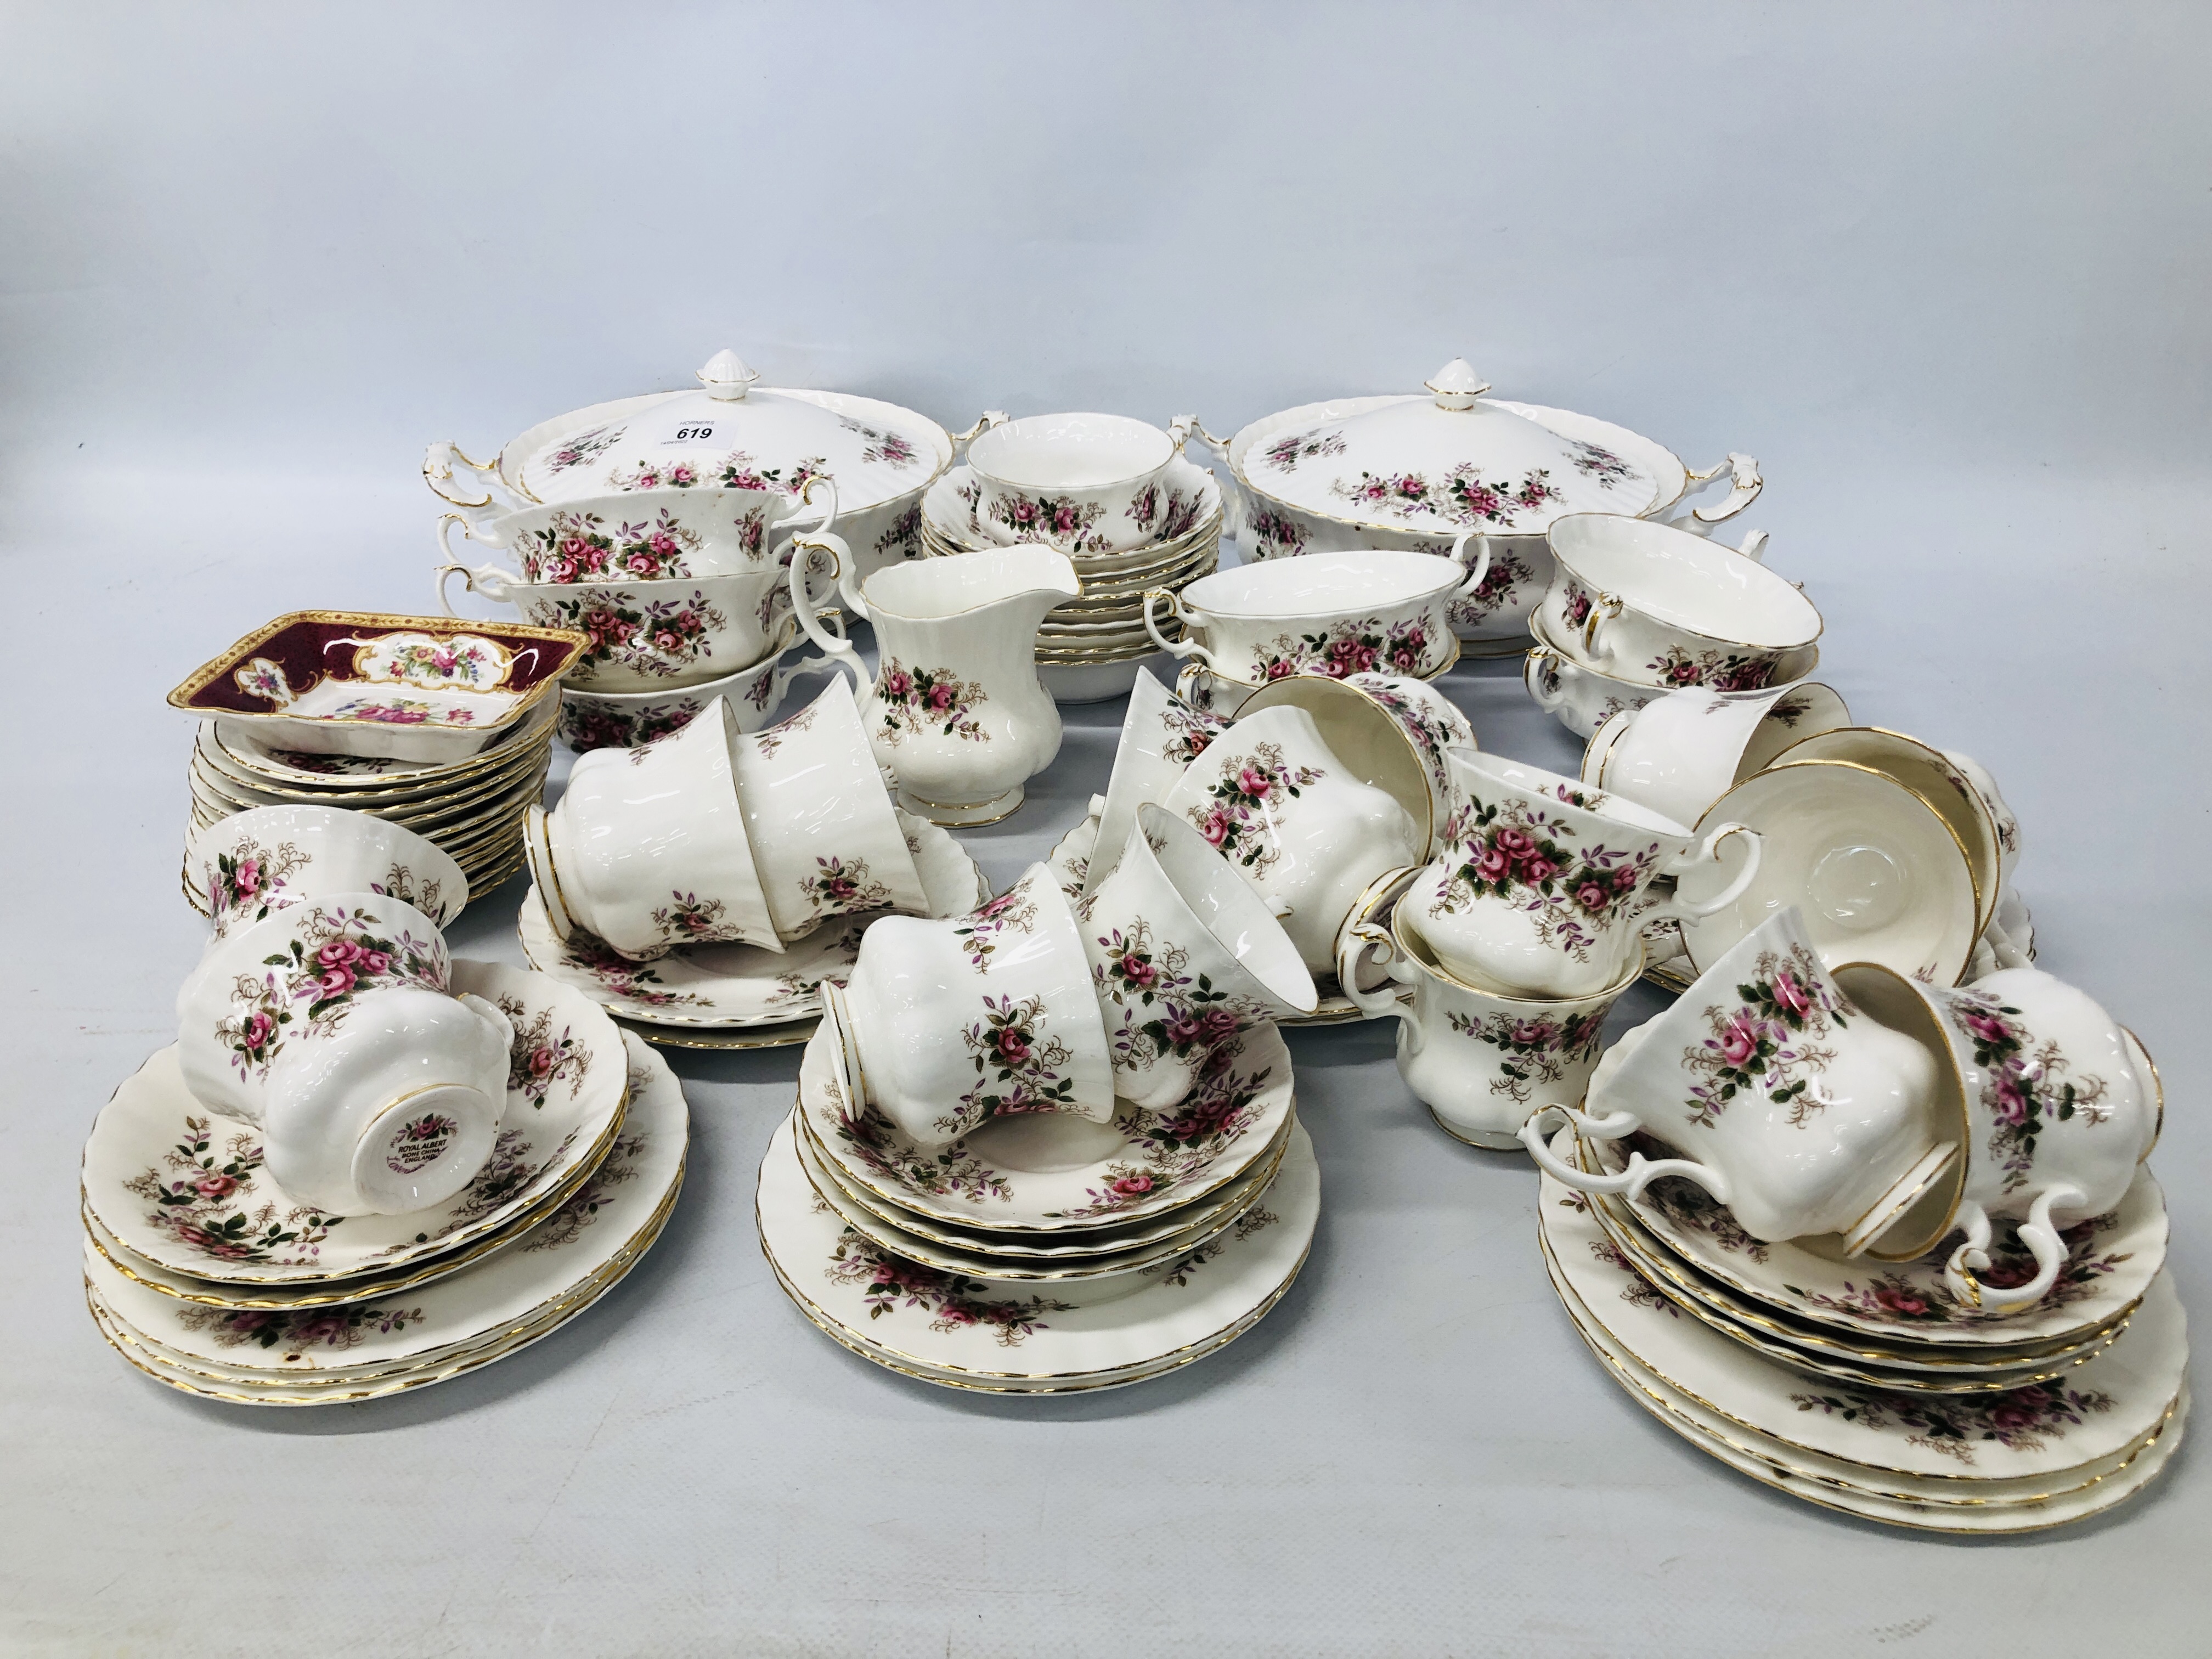 COLLECTION OF ROYAL ALBERT "LAVENDER ROSE" TEA AND DINNER WARE (68 PIECES) + ONE ROYAL ALBERT "LADY